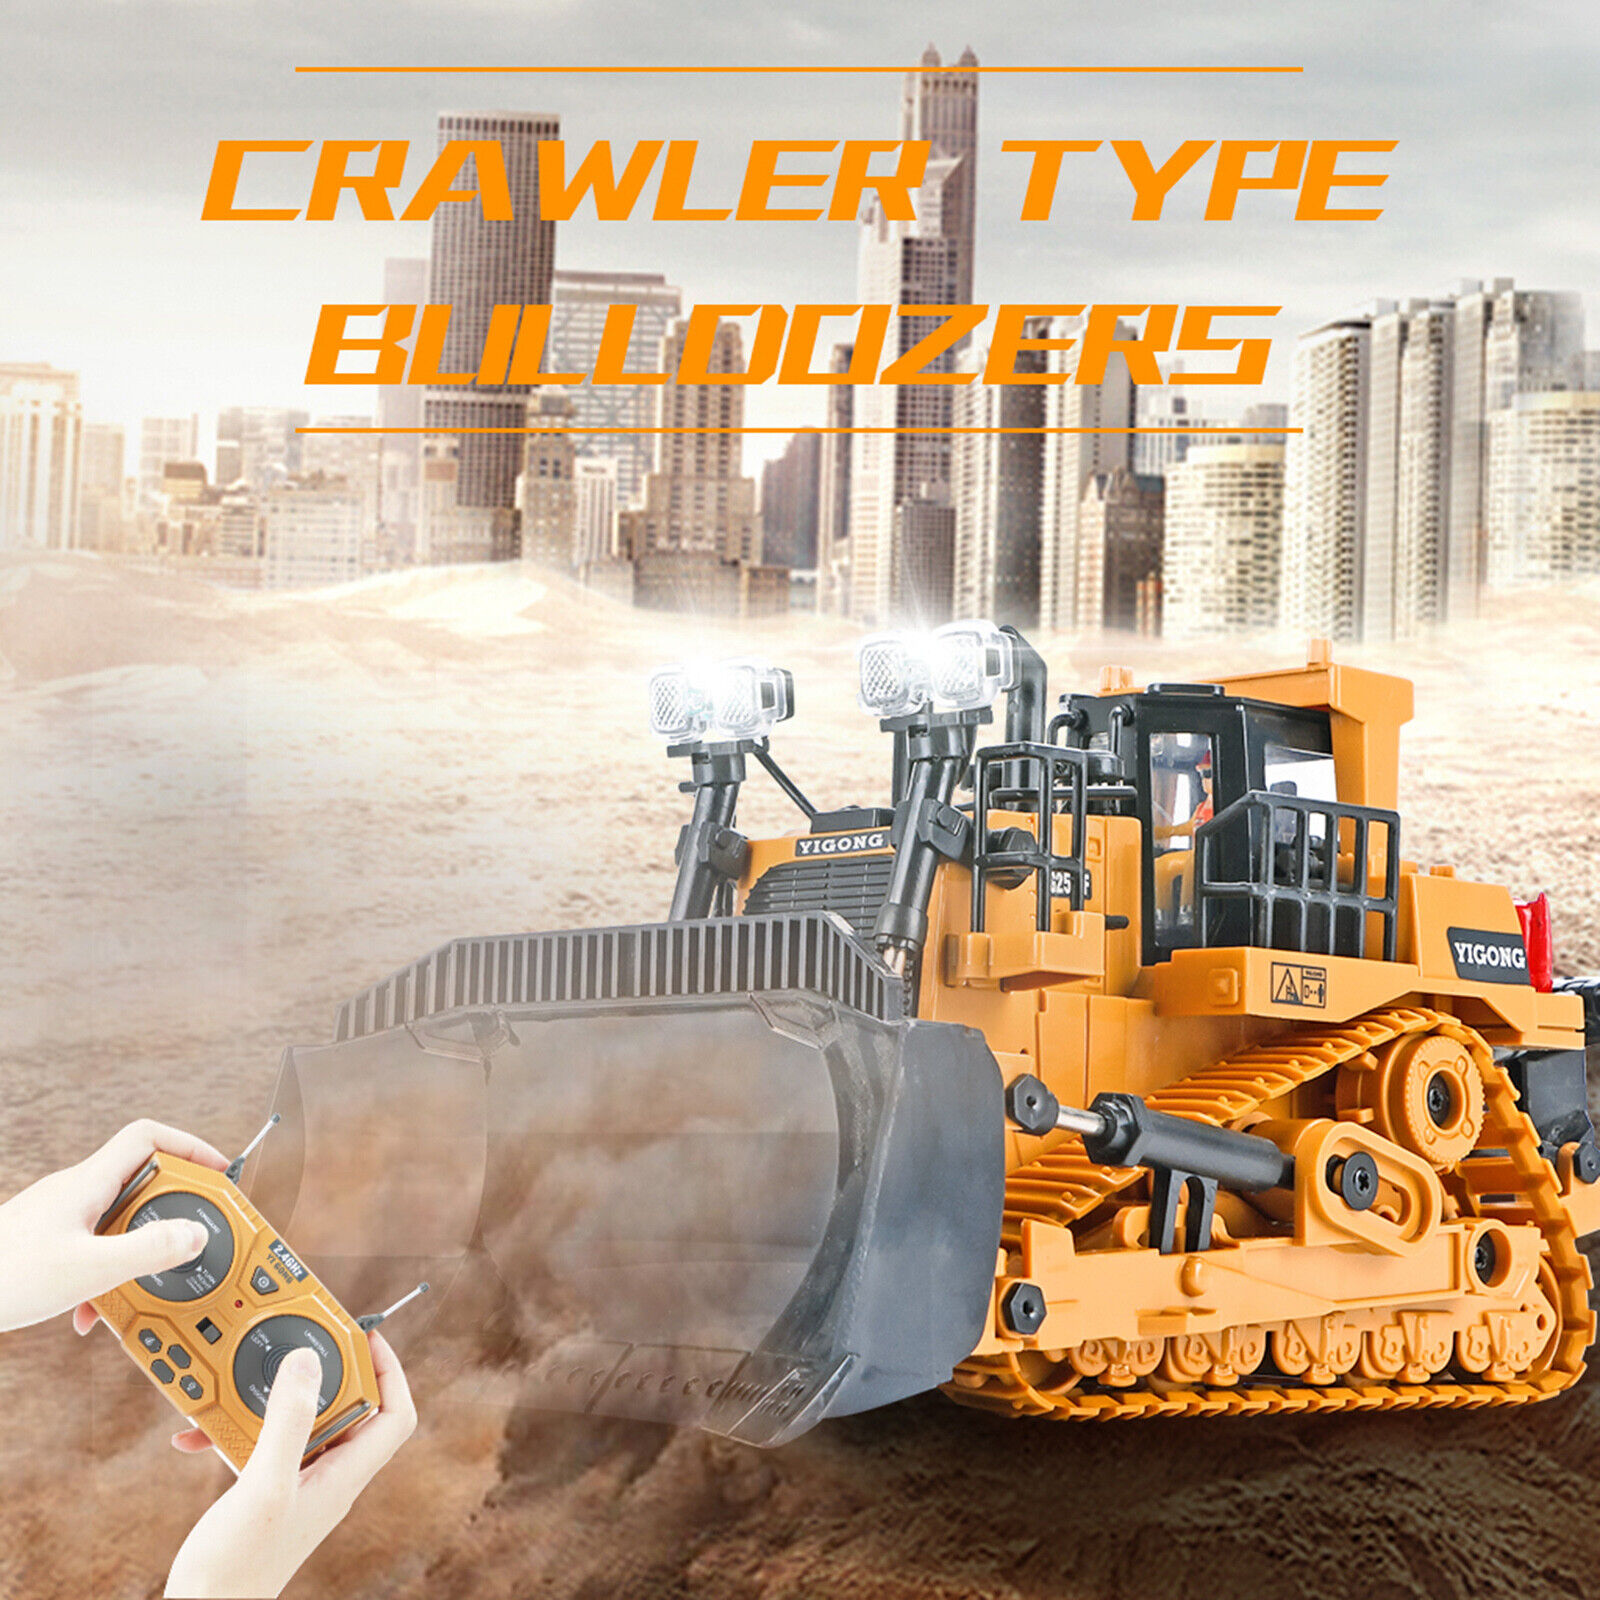 Remote Control Bulldozer Toy, RC Bulldozer Toy with Sound and Lighting. Alloy Front Loader 9 Channel Track Crawler Heavy Dozer Cars for Kids